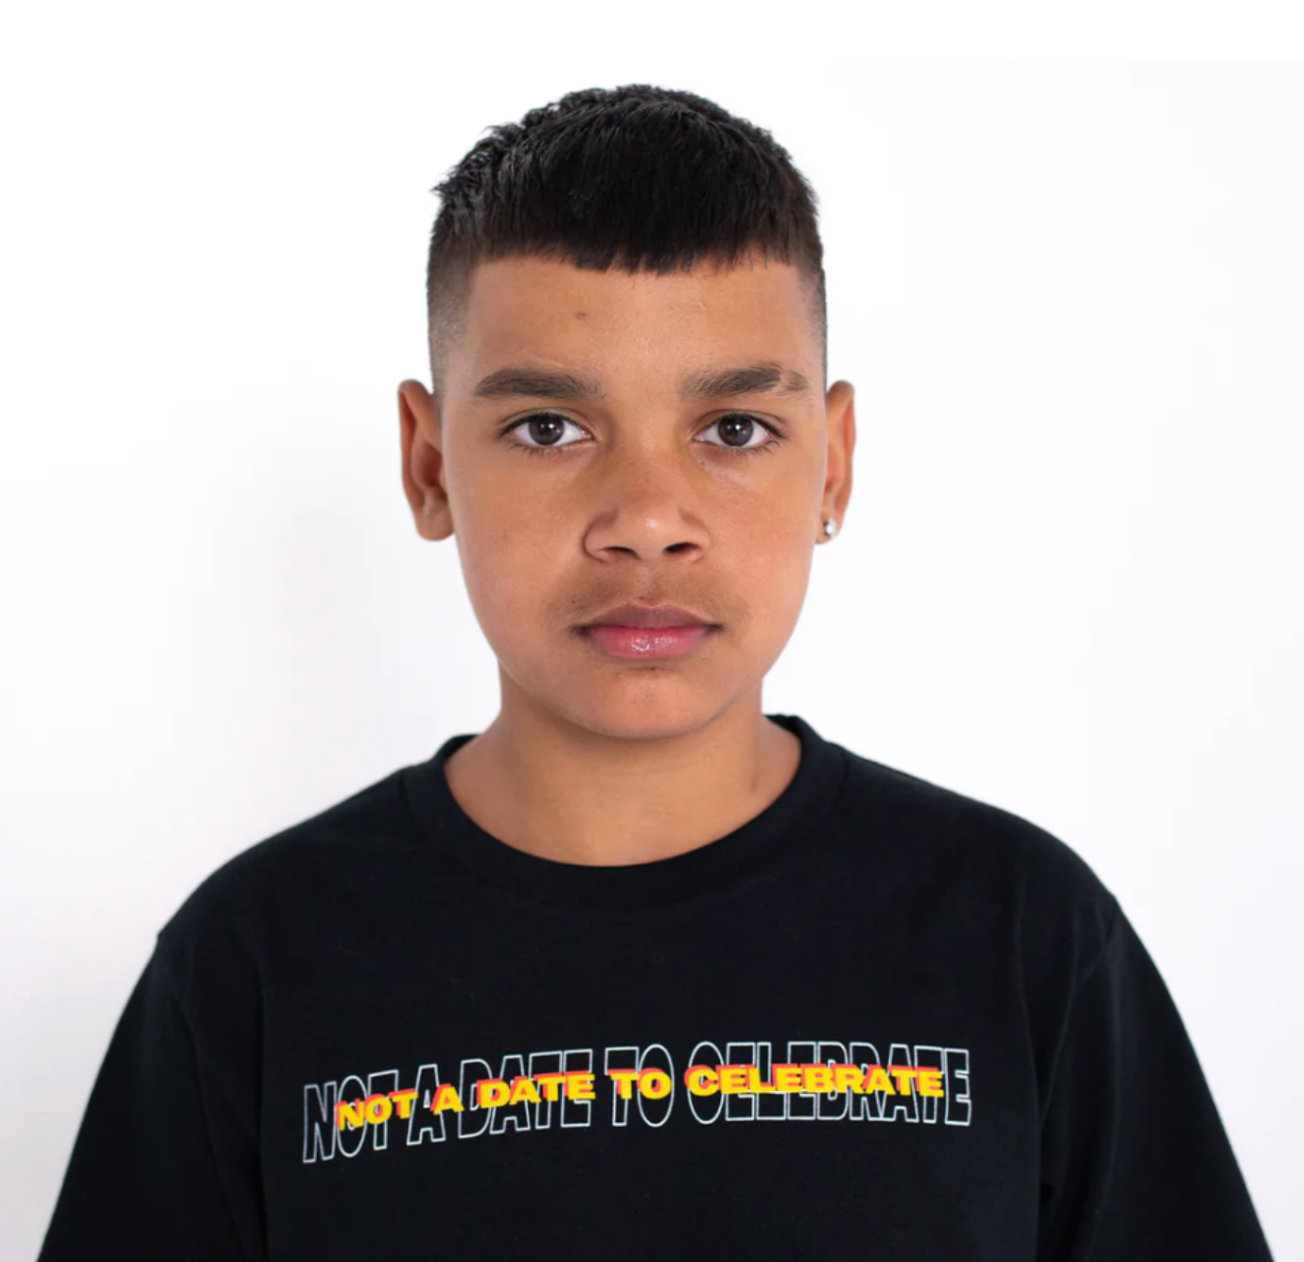 Boy faces the camera wearing a shirt that reads "Not a Date to Celebrate"